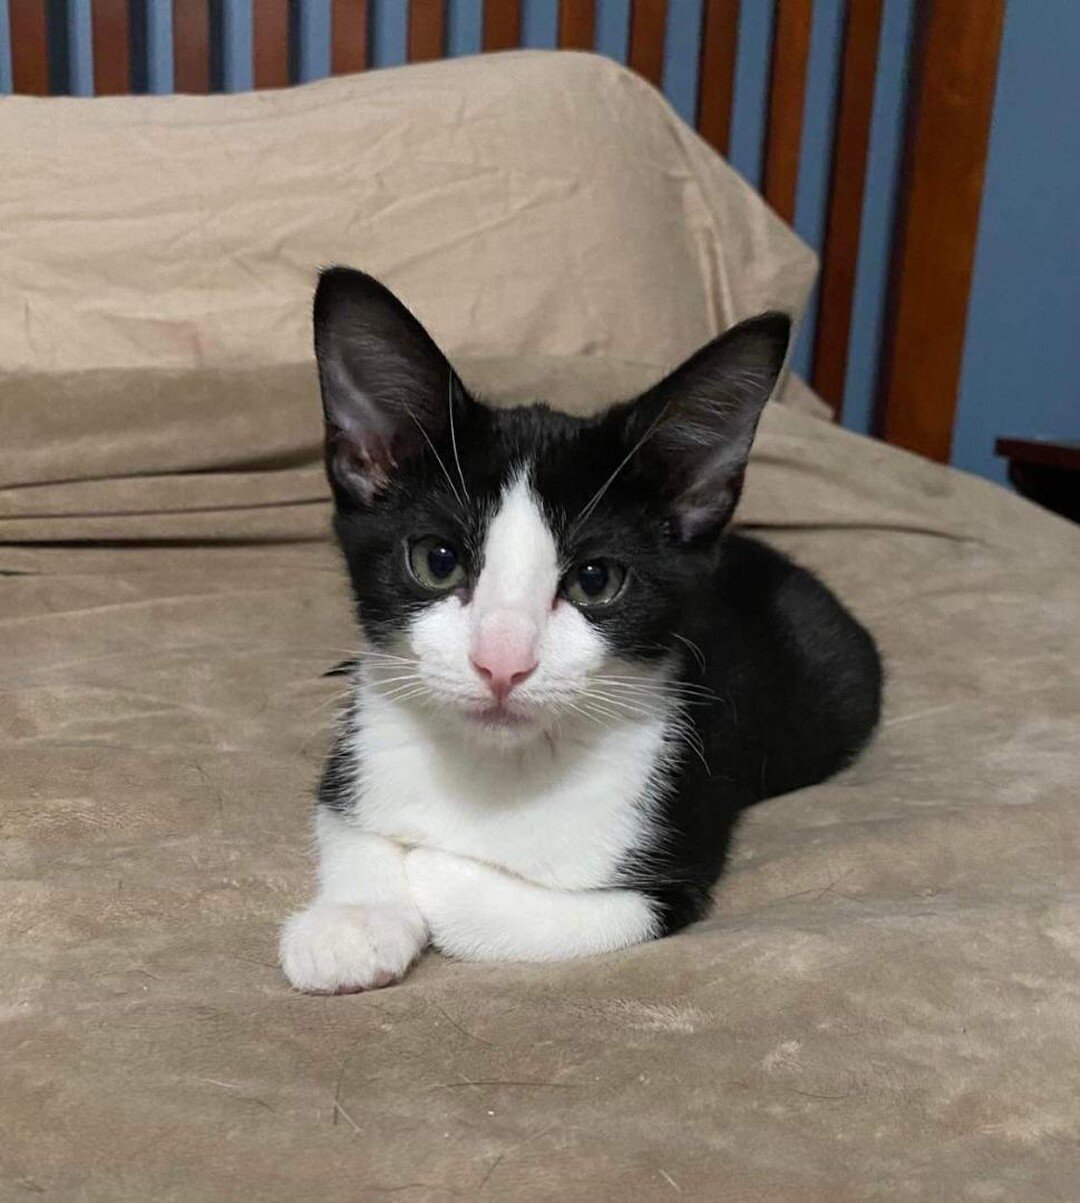 **ADORABLE ADOPTABLE OF THE DAY!!**

Meet Marcus! 💙 Marcus is outgoing little guy who loves to play with tiny mice toys and he's always ready for a wrestling throwdown with his siblings.

If you are interested in meeting Marcus, please fill out an a